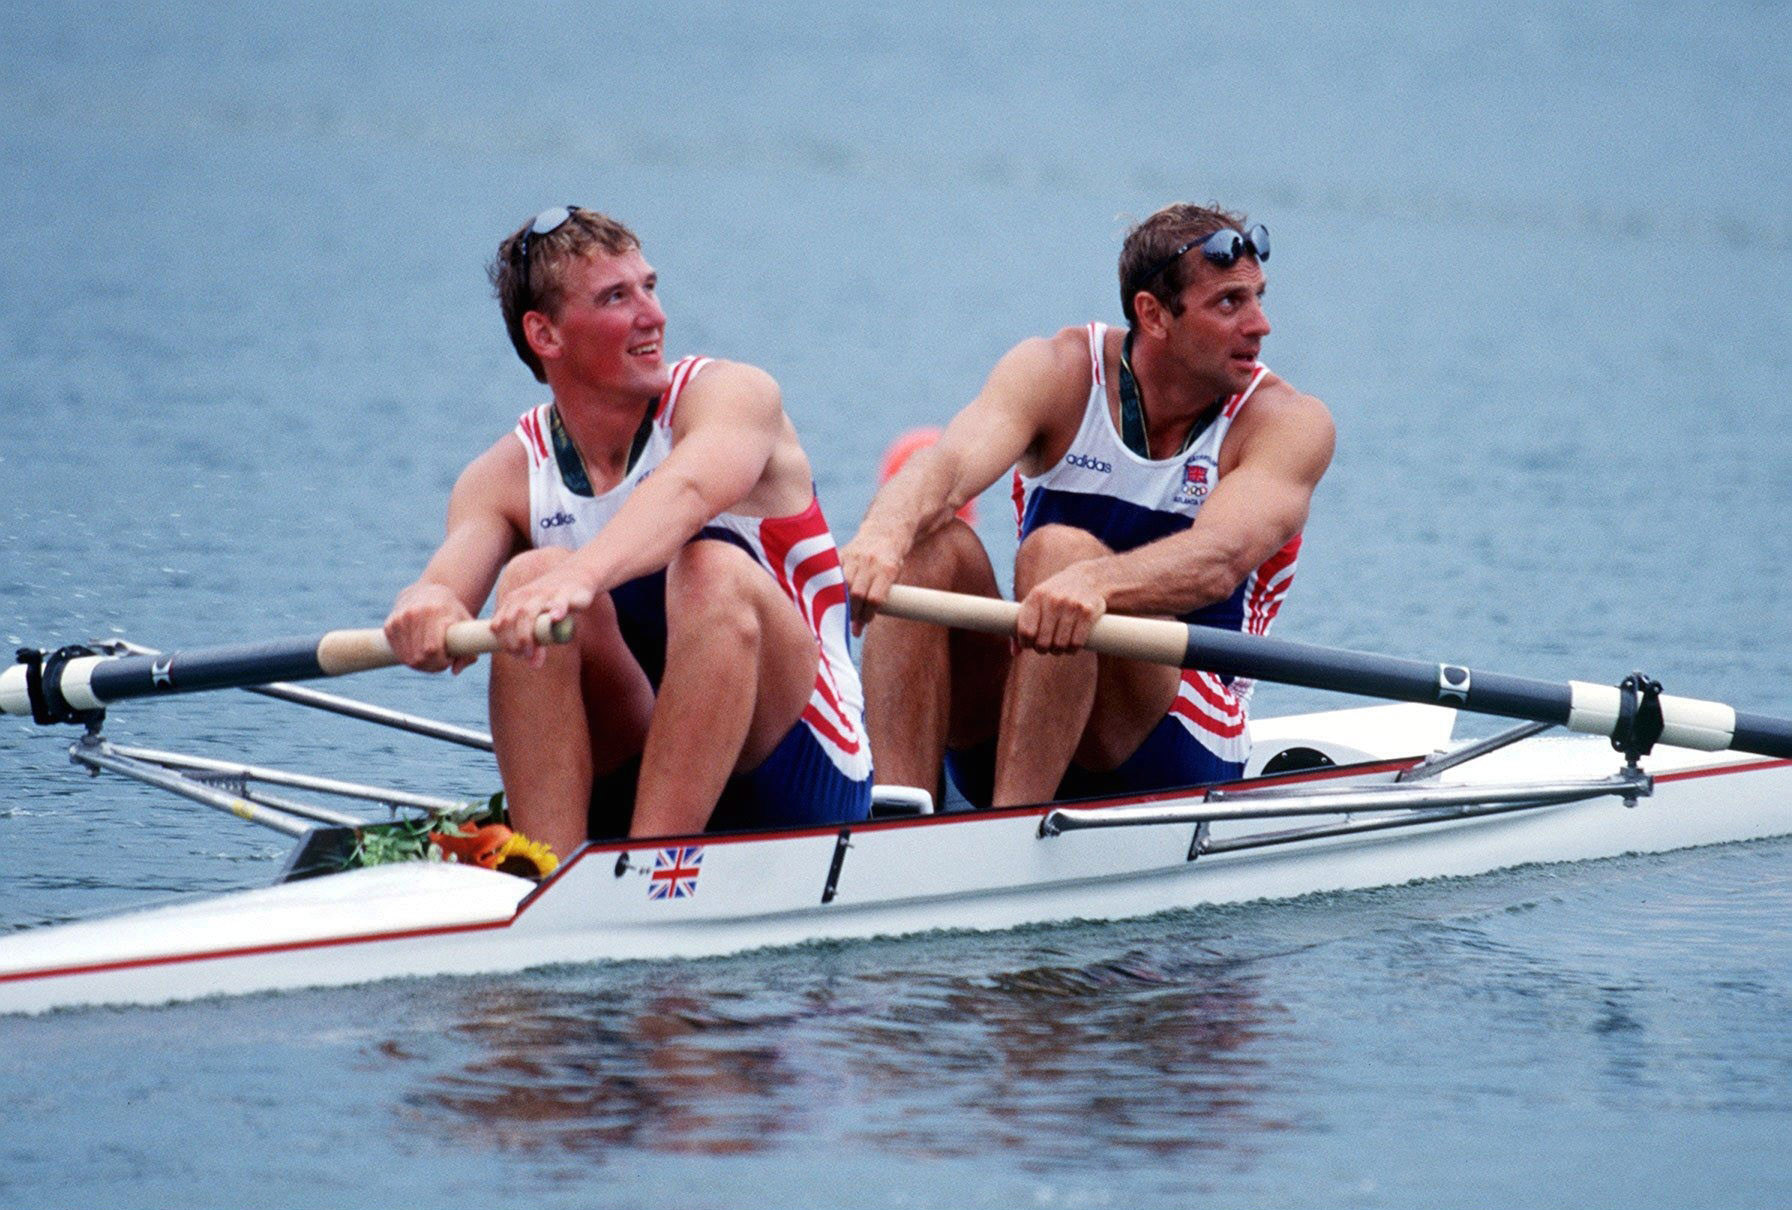 Rowers Matthew Pinsent and Steve Redgrave secured Great Britain's only gold medal at the Atlanta 1996 Olympic Games ©Getty Images